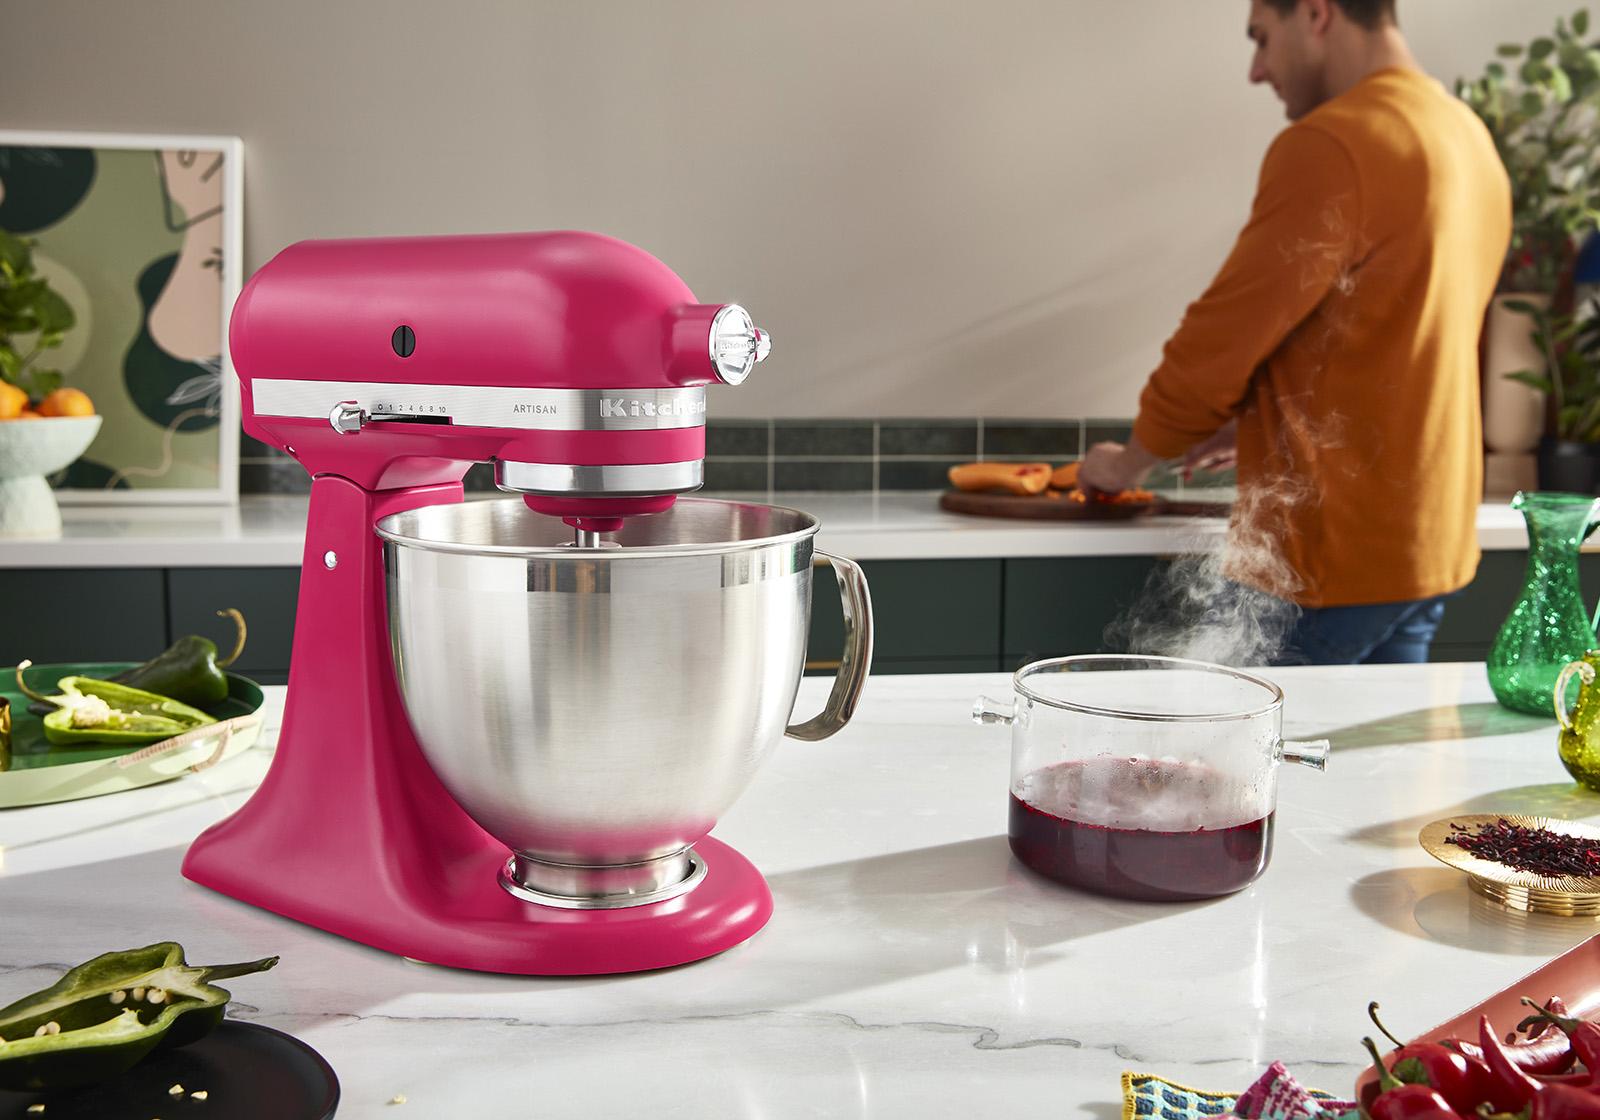 KitchenAid names Hibiscus as its 2023 Color of the Calendar year -  Restaurant Guides